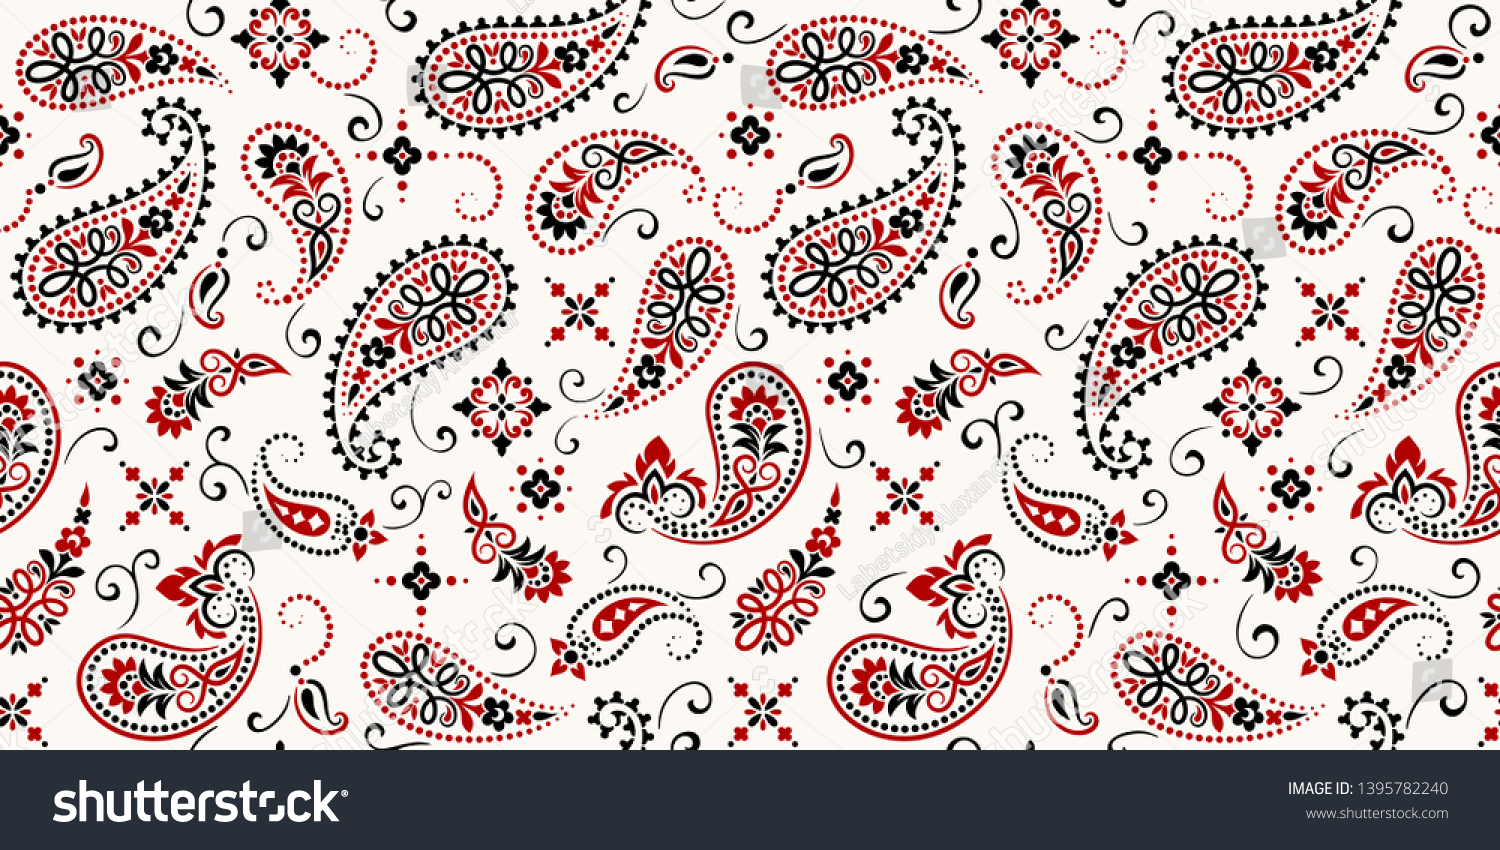 SVG of Seamless pattern based on ornament paisley Bandana Print. Vector ornament paisley Bandana Print. Silk neck scarf or kerchief square pattern design style, best motive for print on fabric or papper. svg